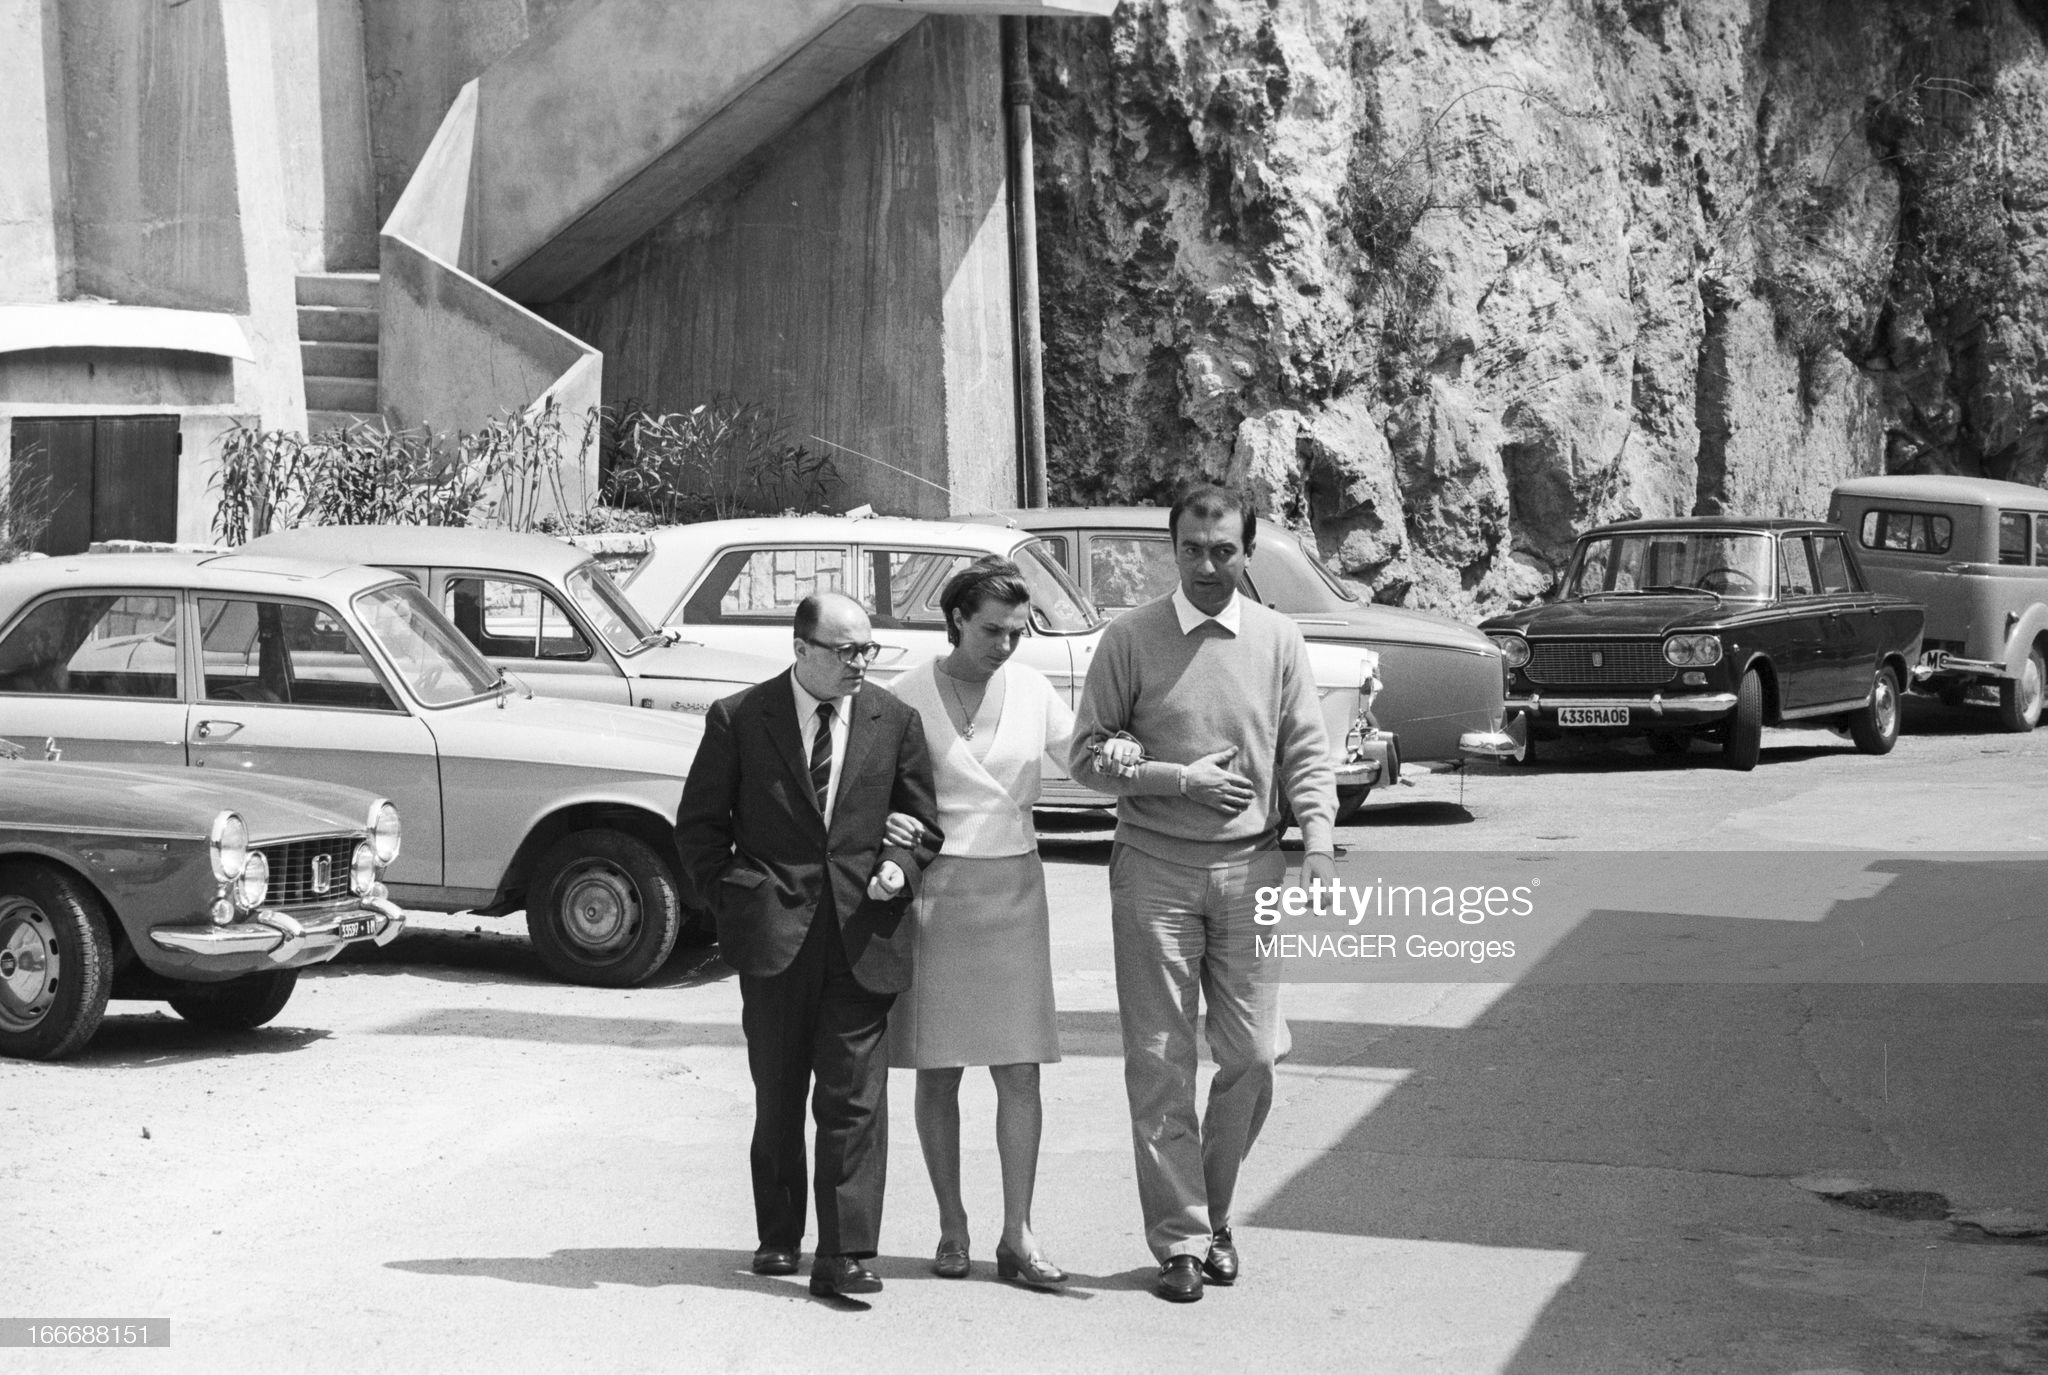 Lorenzo Bandini, in a Ferrari 321, had an accident in the Principality and was transported to the Princess Grace Hospital where his wife Margherita came to visit him supported by friends. 